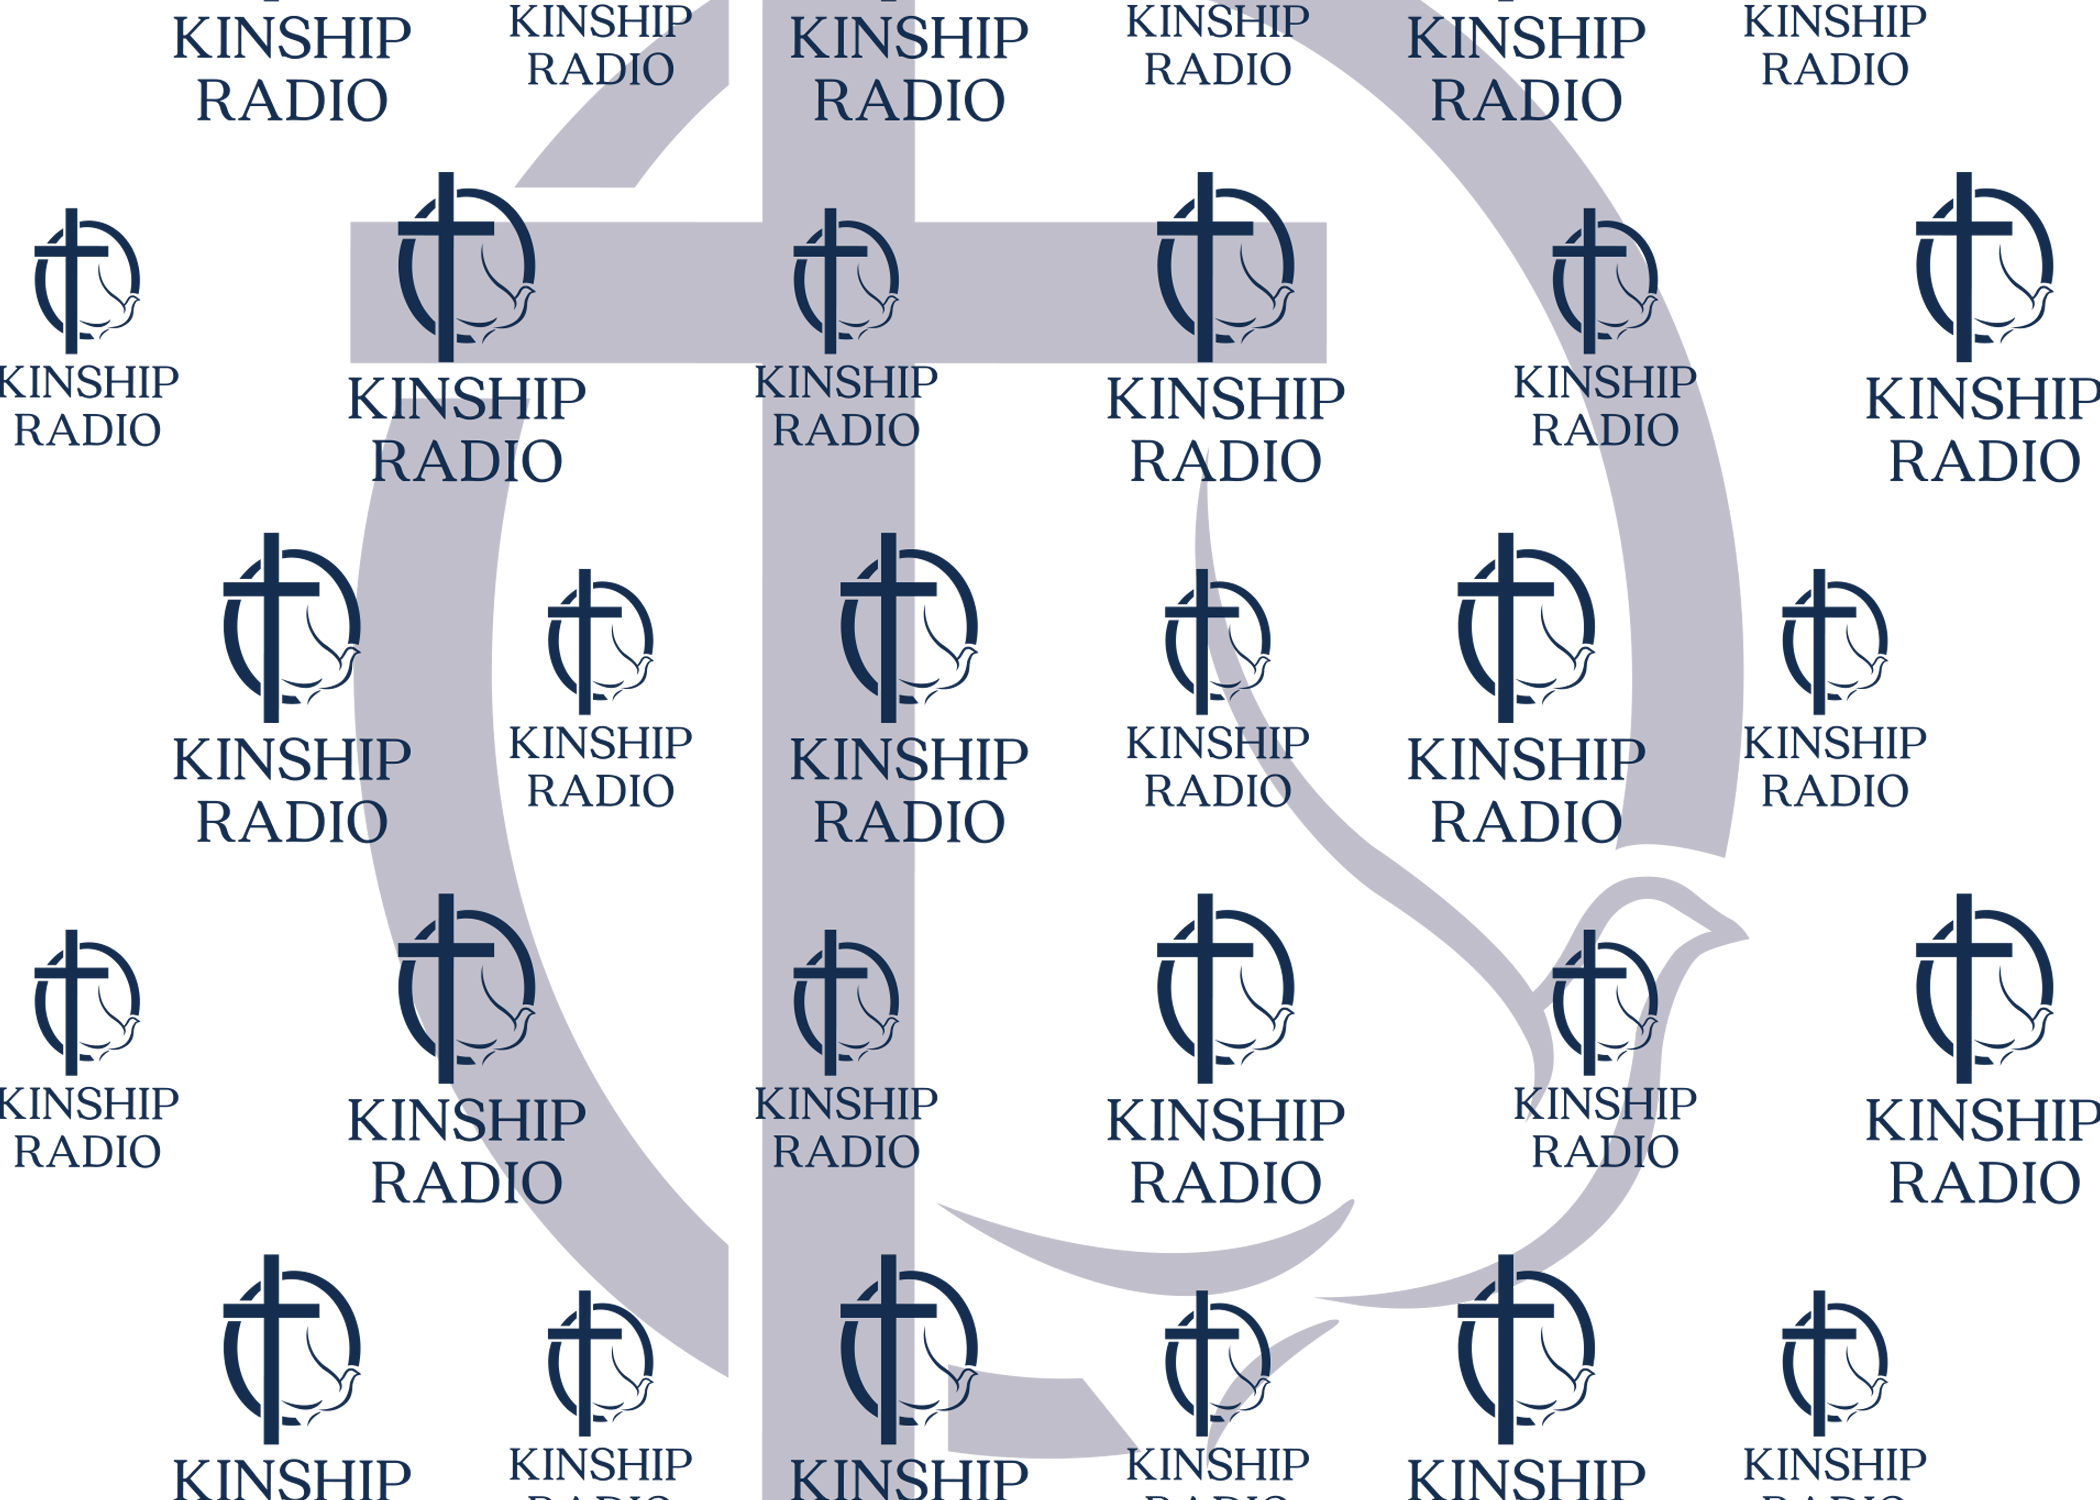 How Can I Support Kinship Radio?